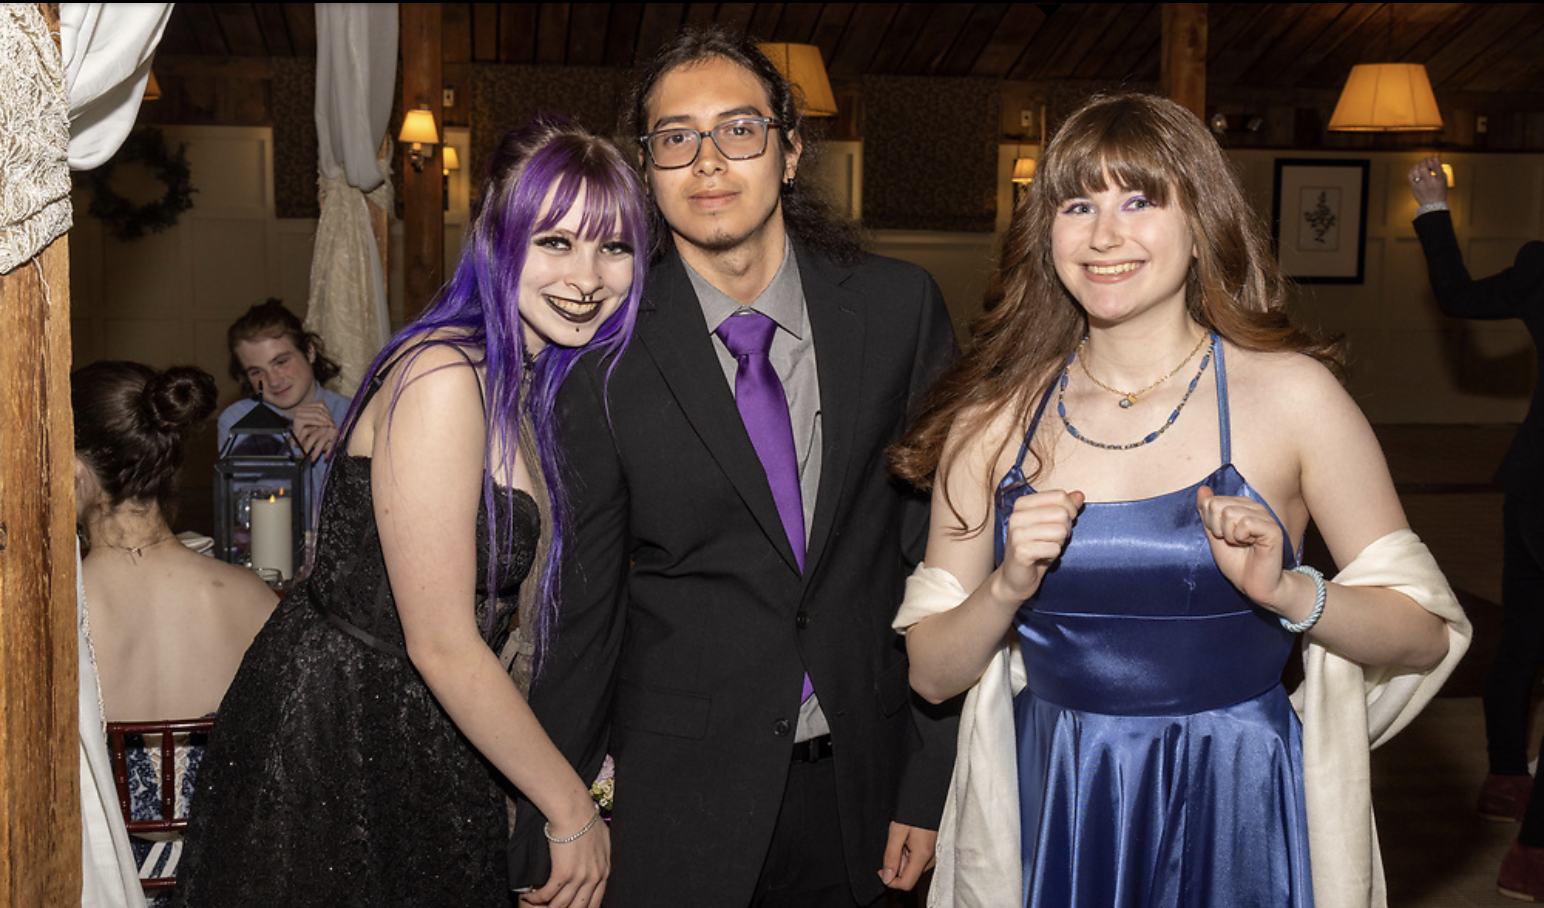 Three students at the dance